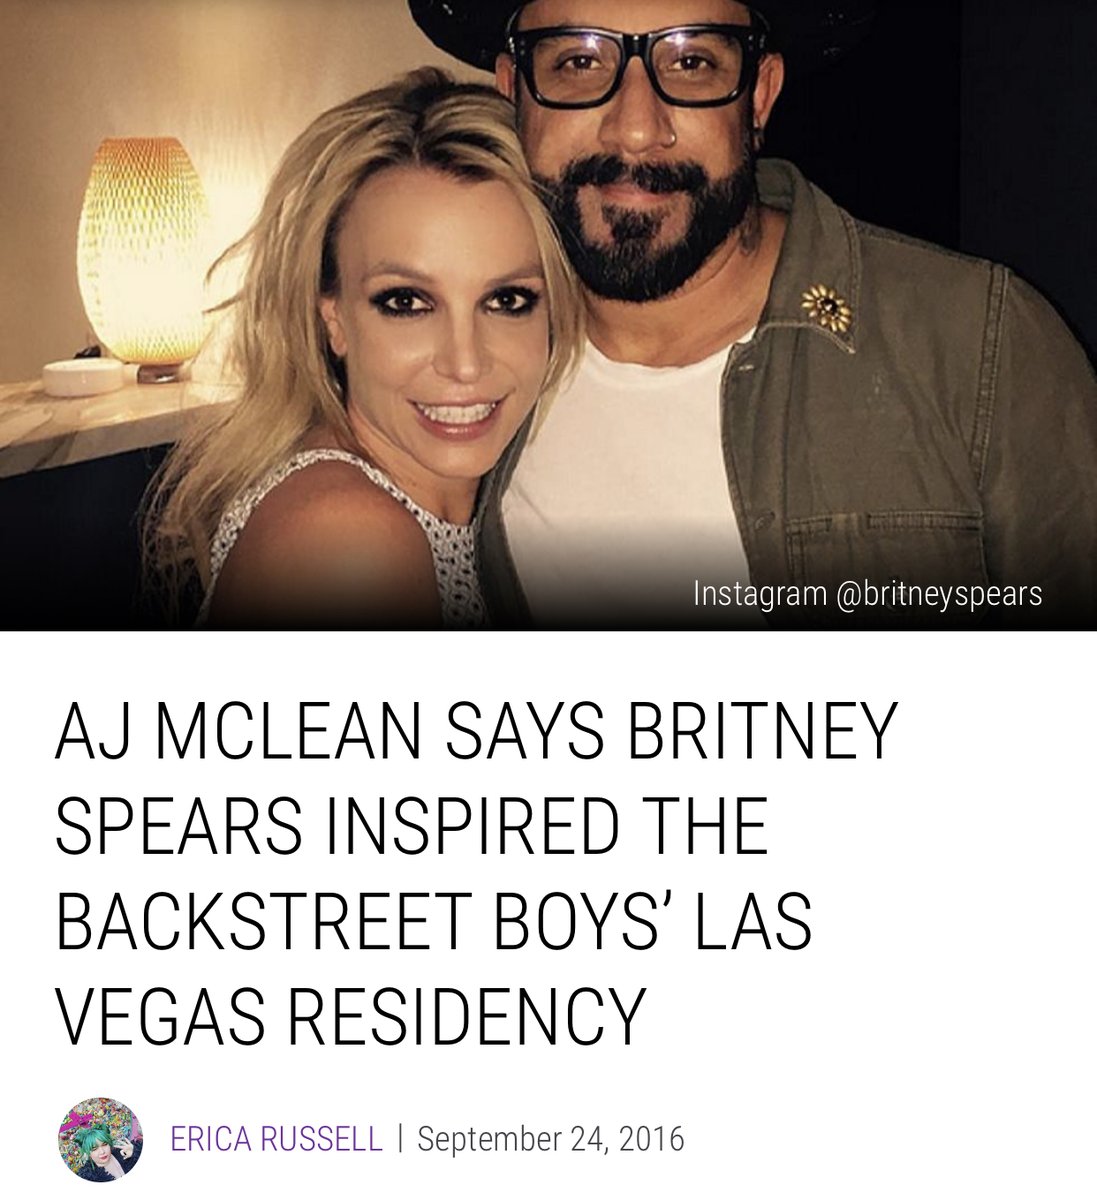 AJ from the Backstreet Boys credited for their Vegas residency, claiming she inspired them to do it.